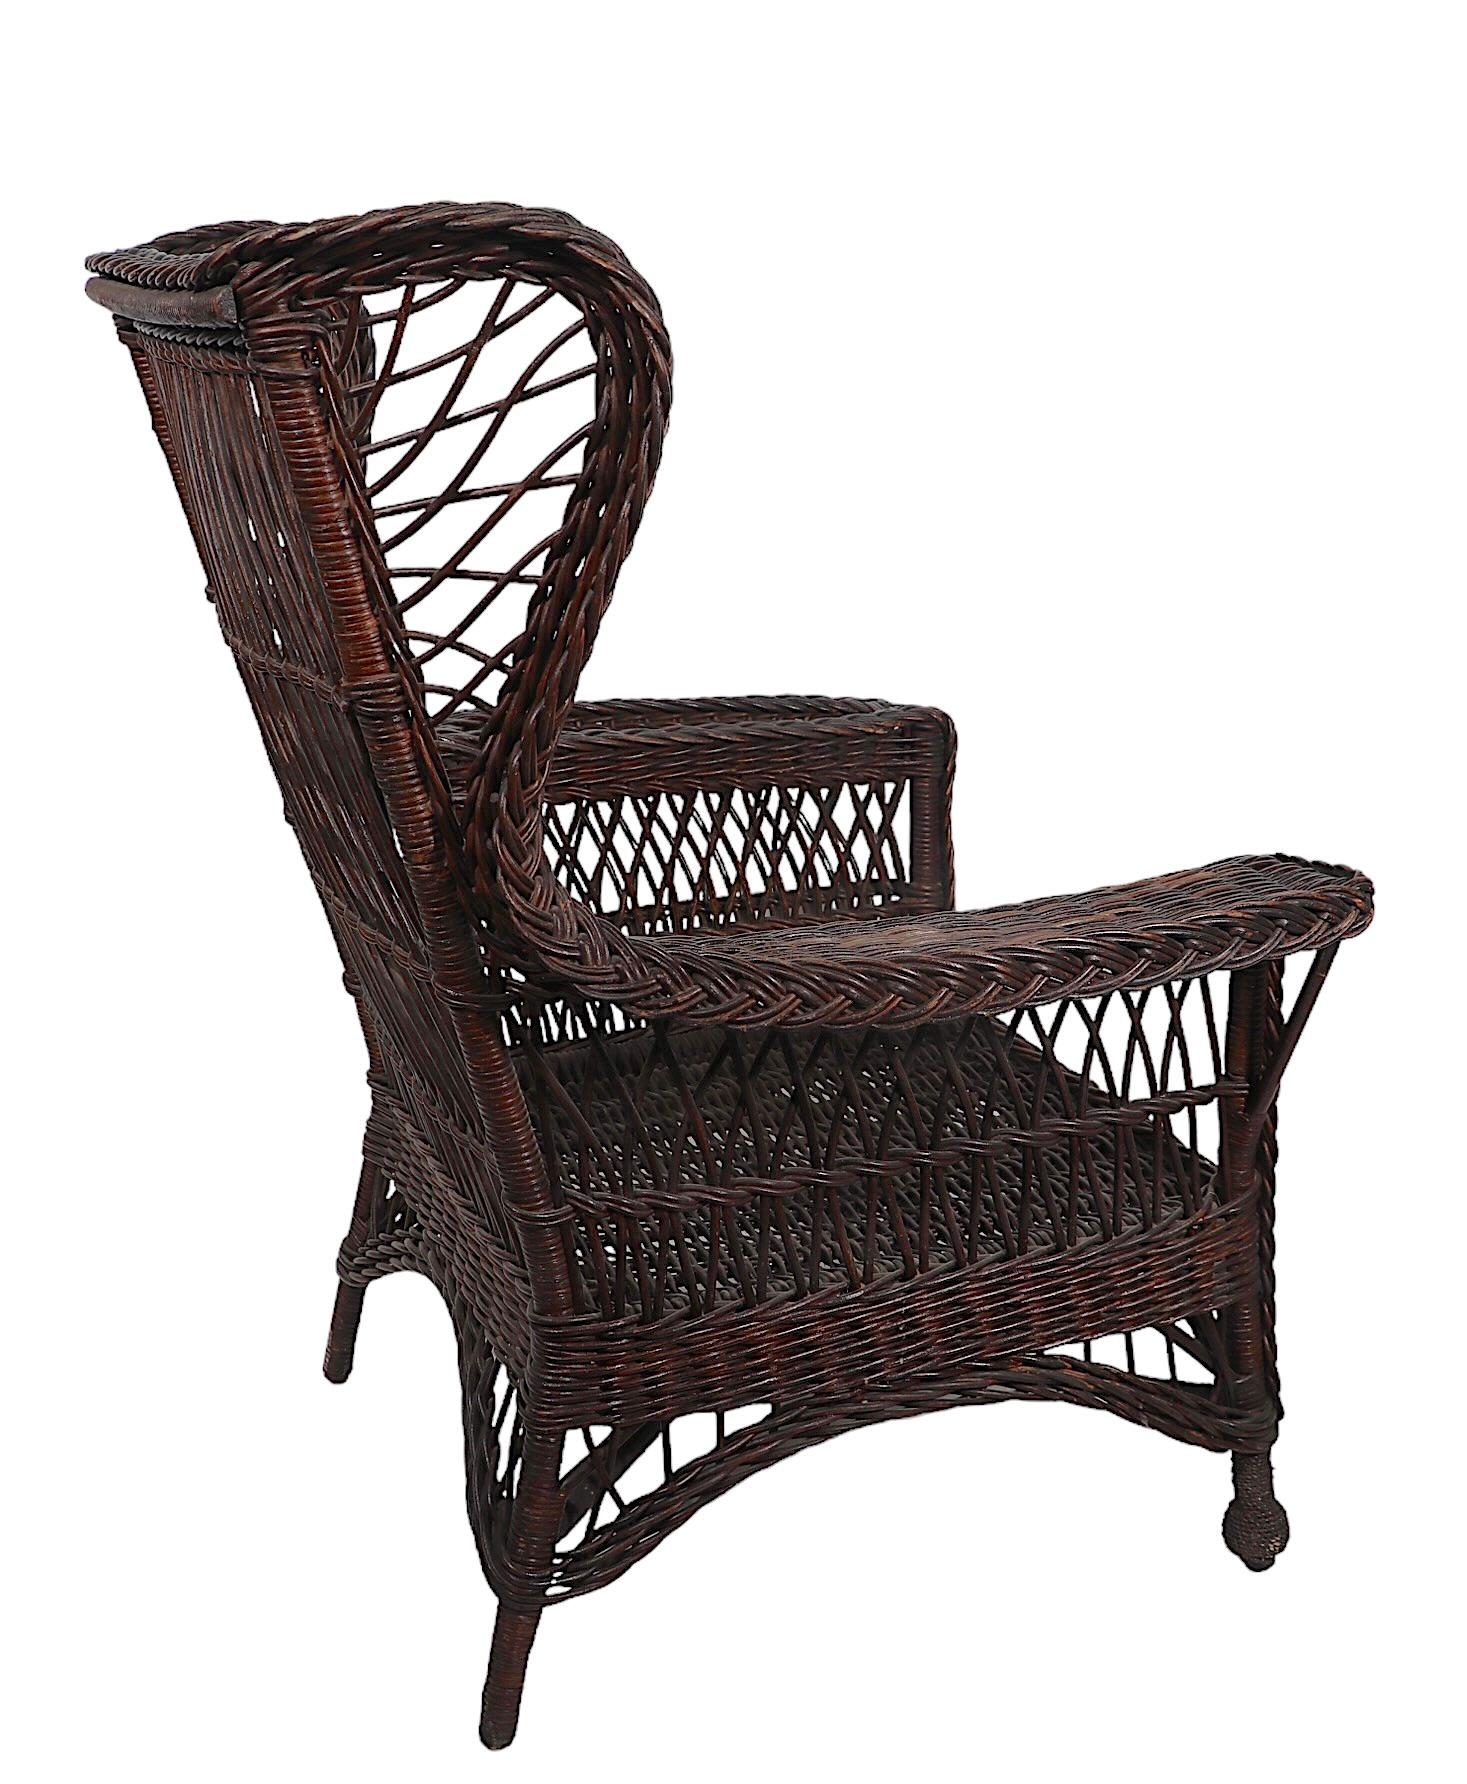 American Victorian Bar Harbor Wicker Wing Chair with Magazine Rack Arm For Sale